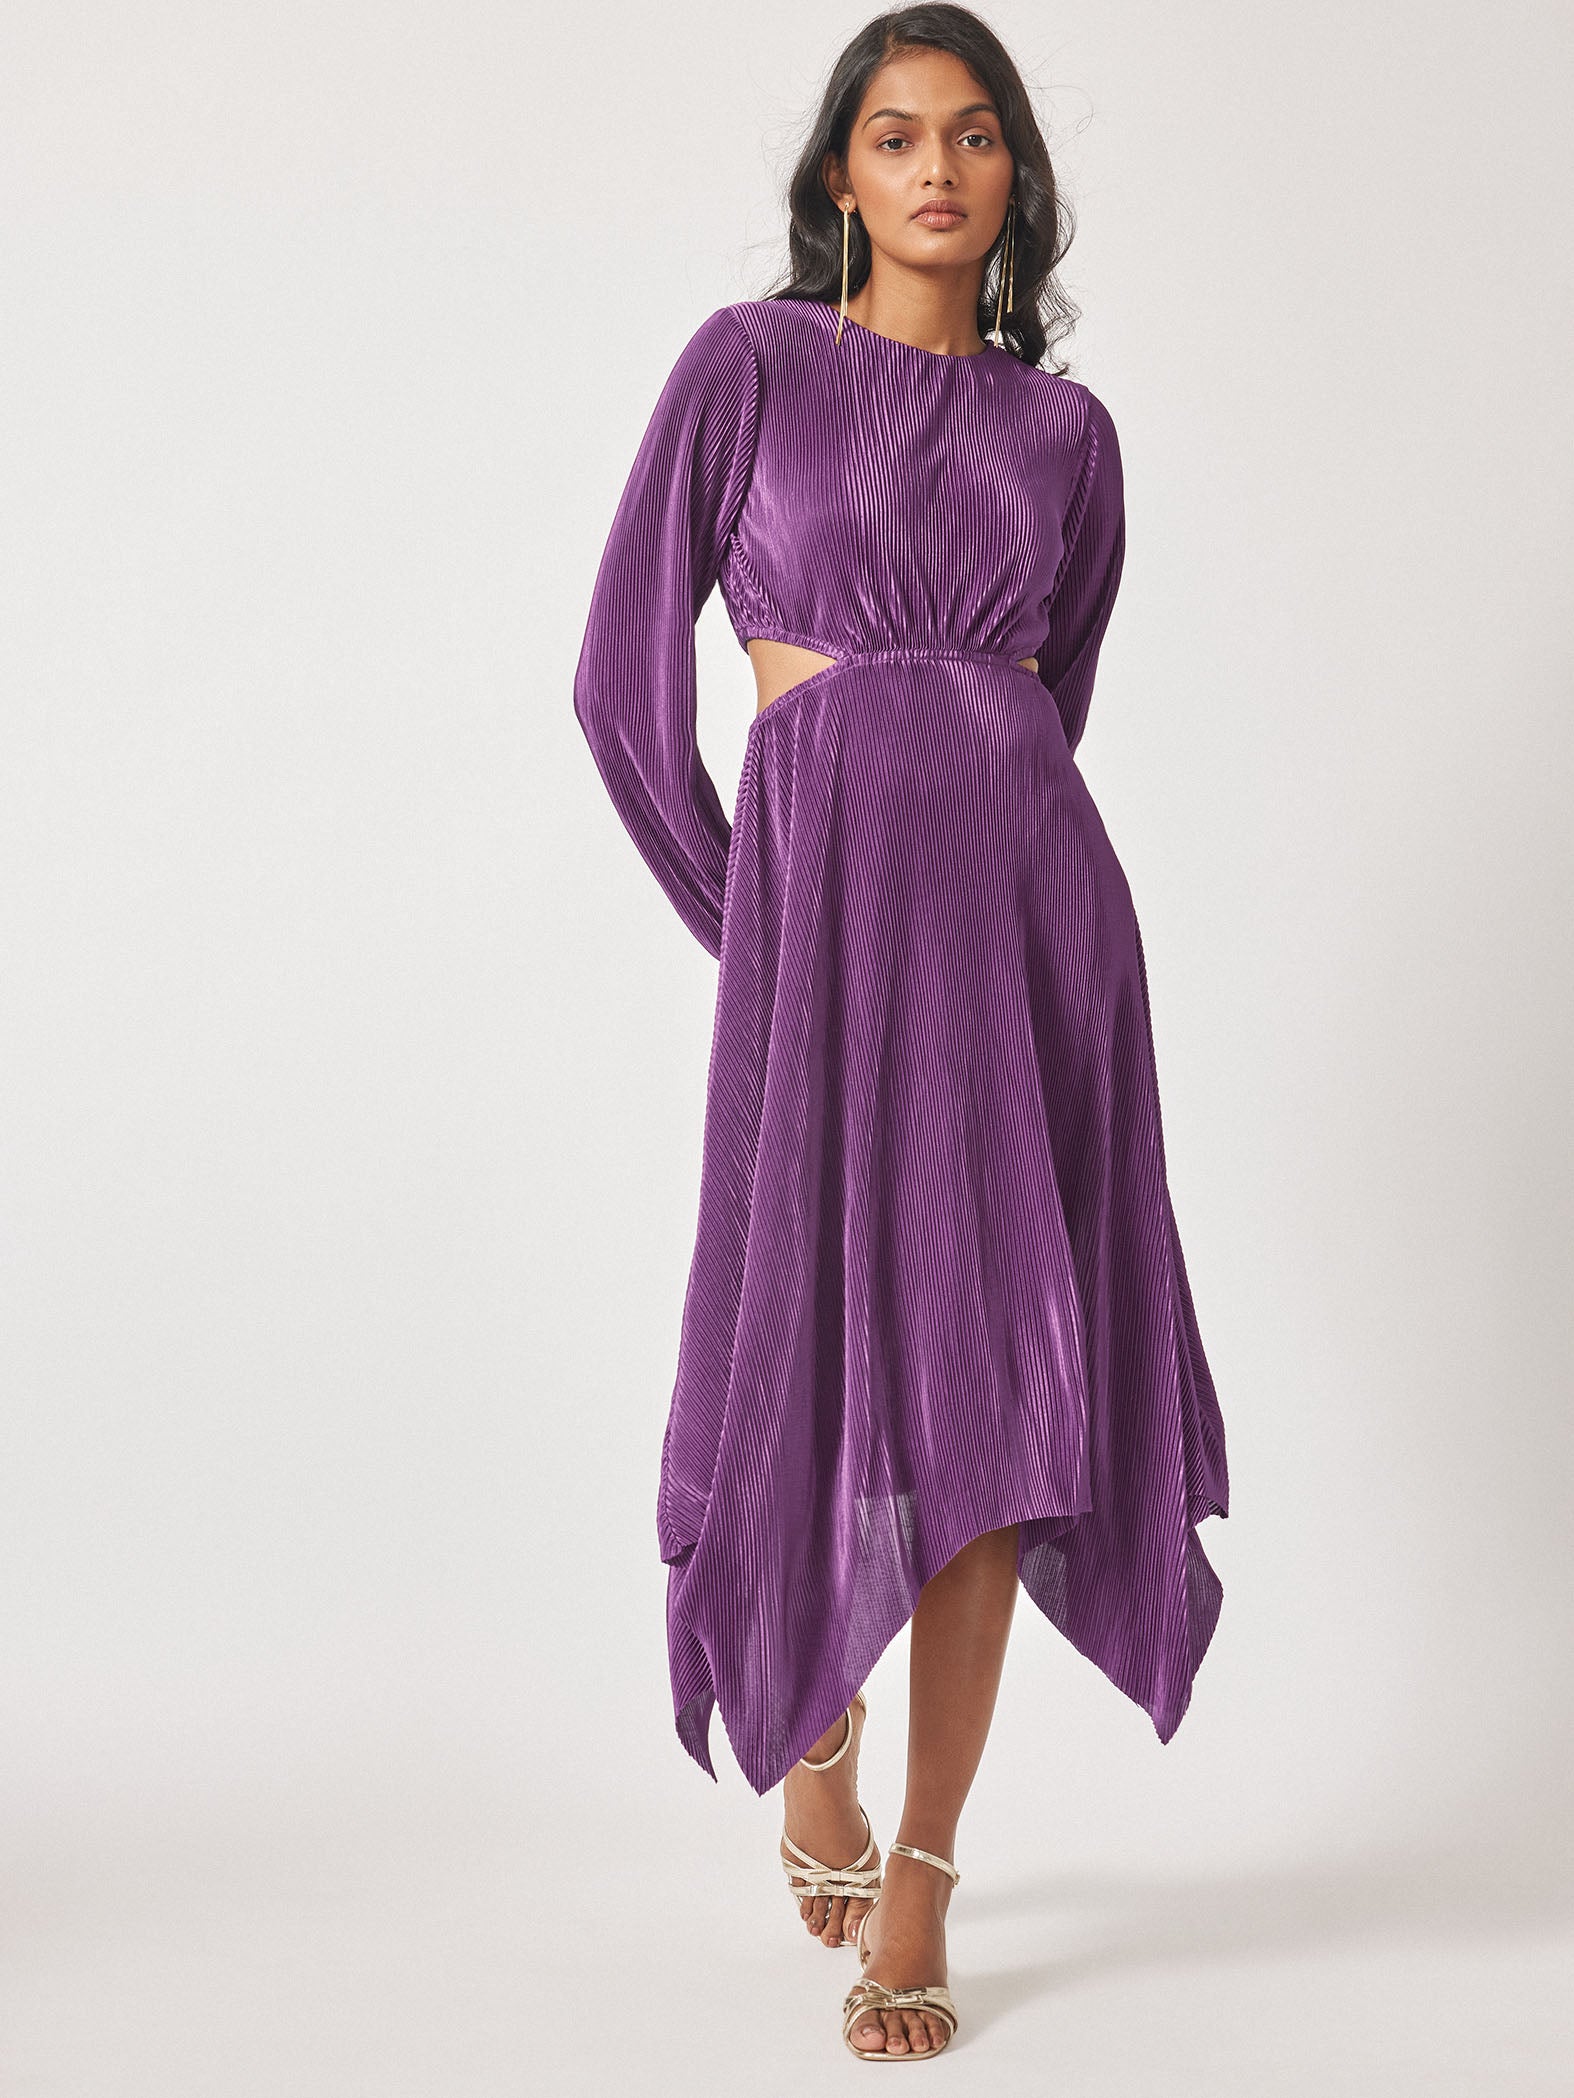 Plum Pleated Cut Out Dress